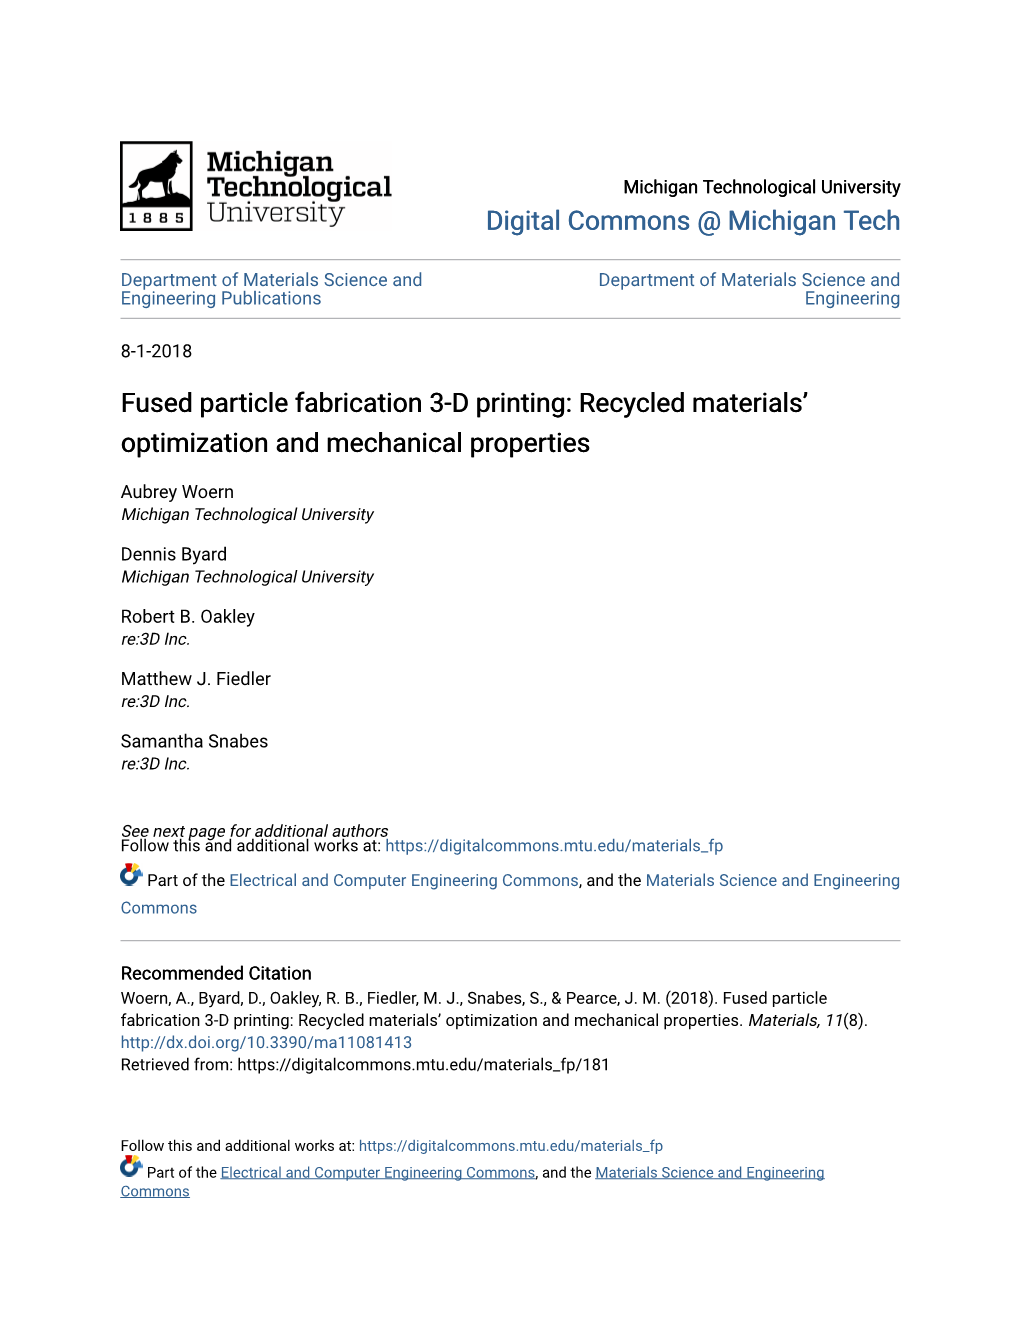 Fused Particle Fabrication 3-D Printing: Recycled Materials’ Optimization and Mechanical Properties